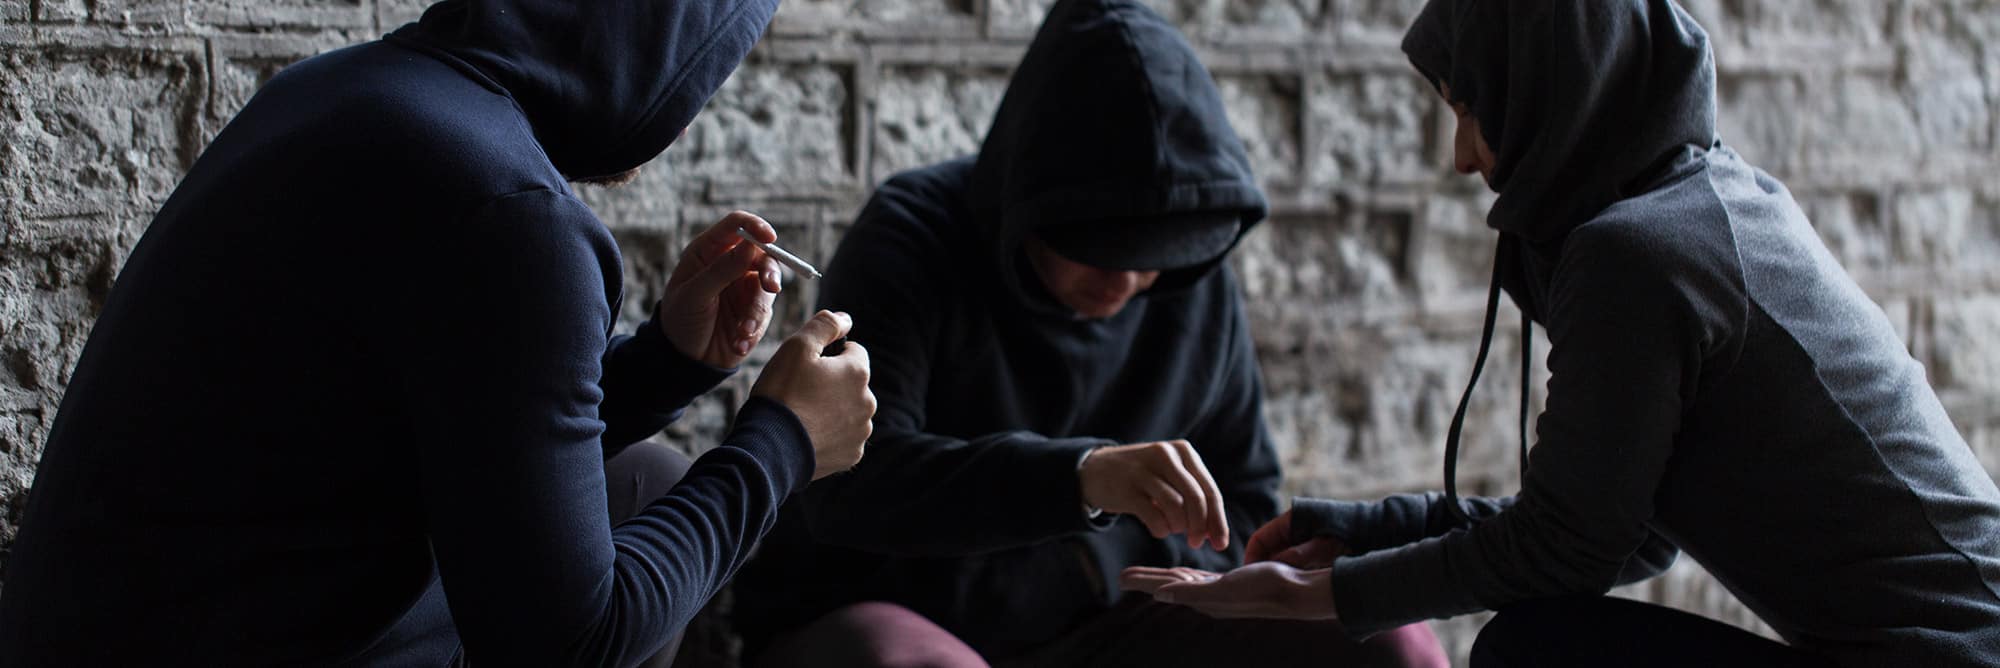 three young adults in need of rehab, huddles together near a dark brick wall, all of them are wearing hoodies. One is smoking a marijuana joint, the other is selling pills to the other